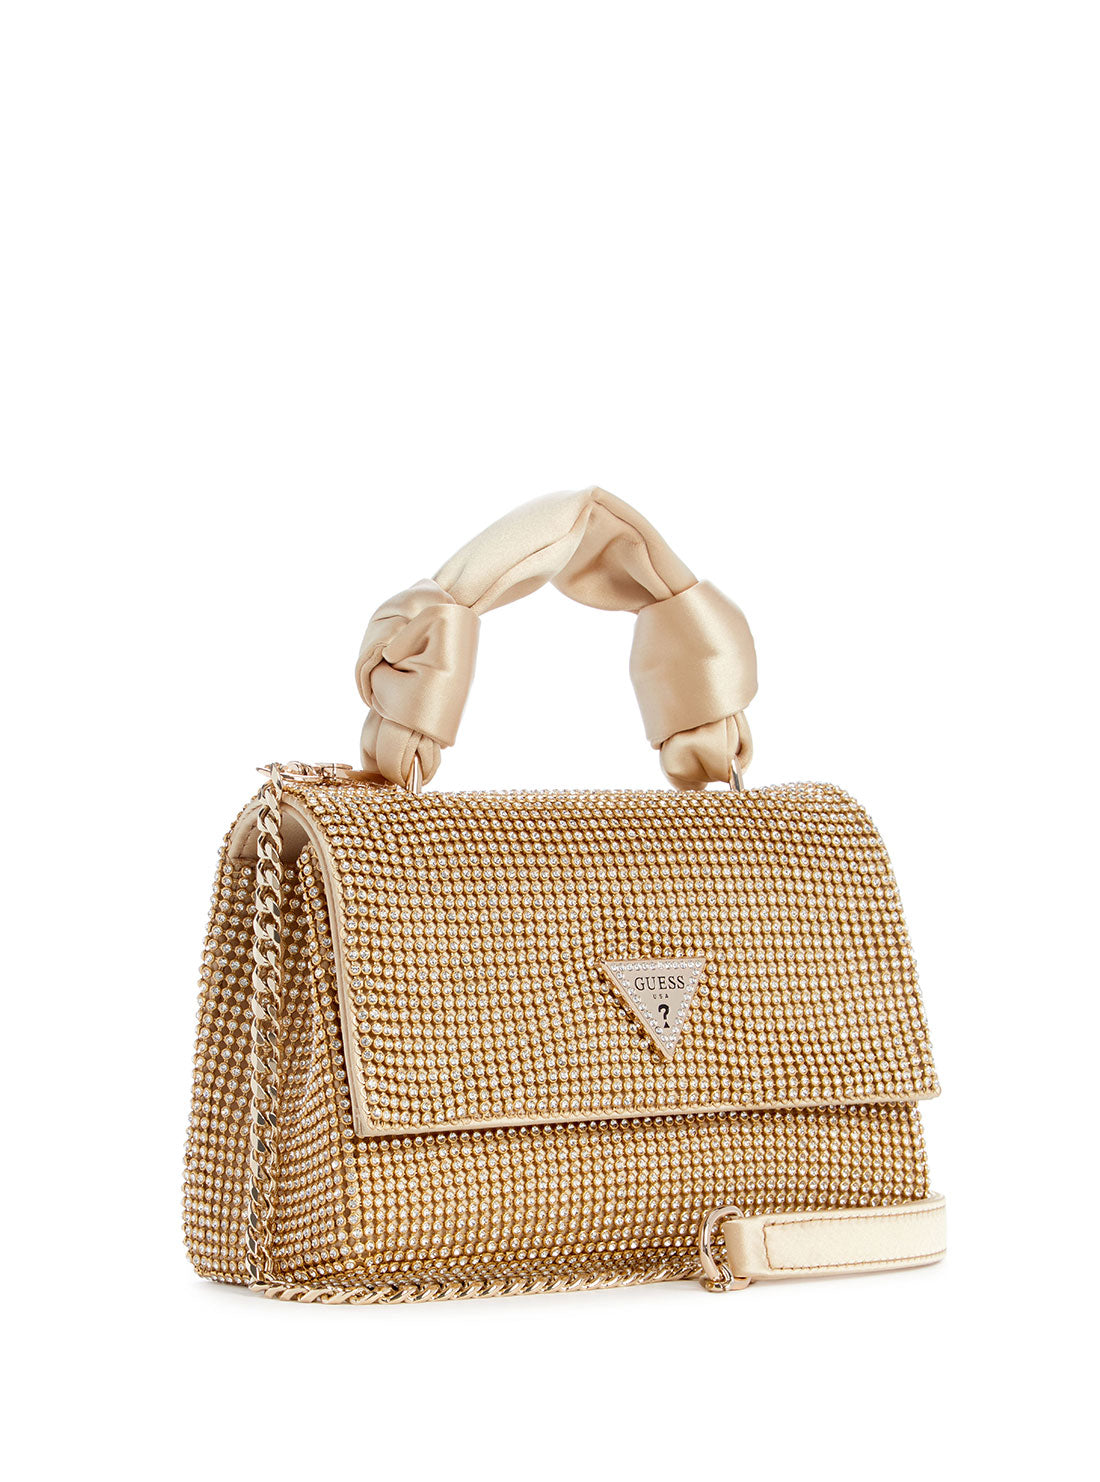 GUESS Gold Lua Top Handle Flap Bag side view